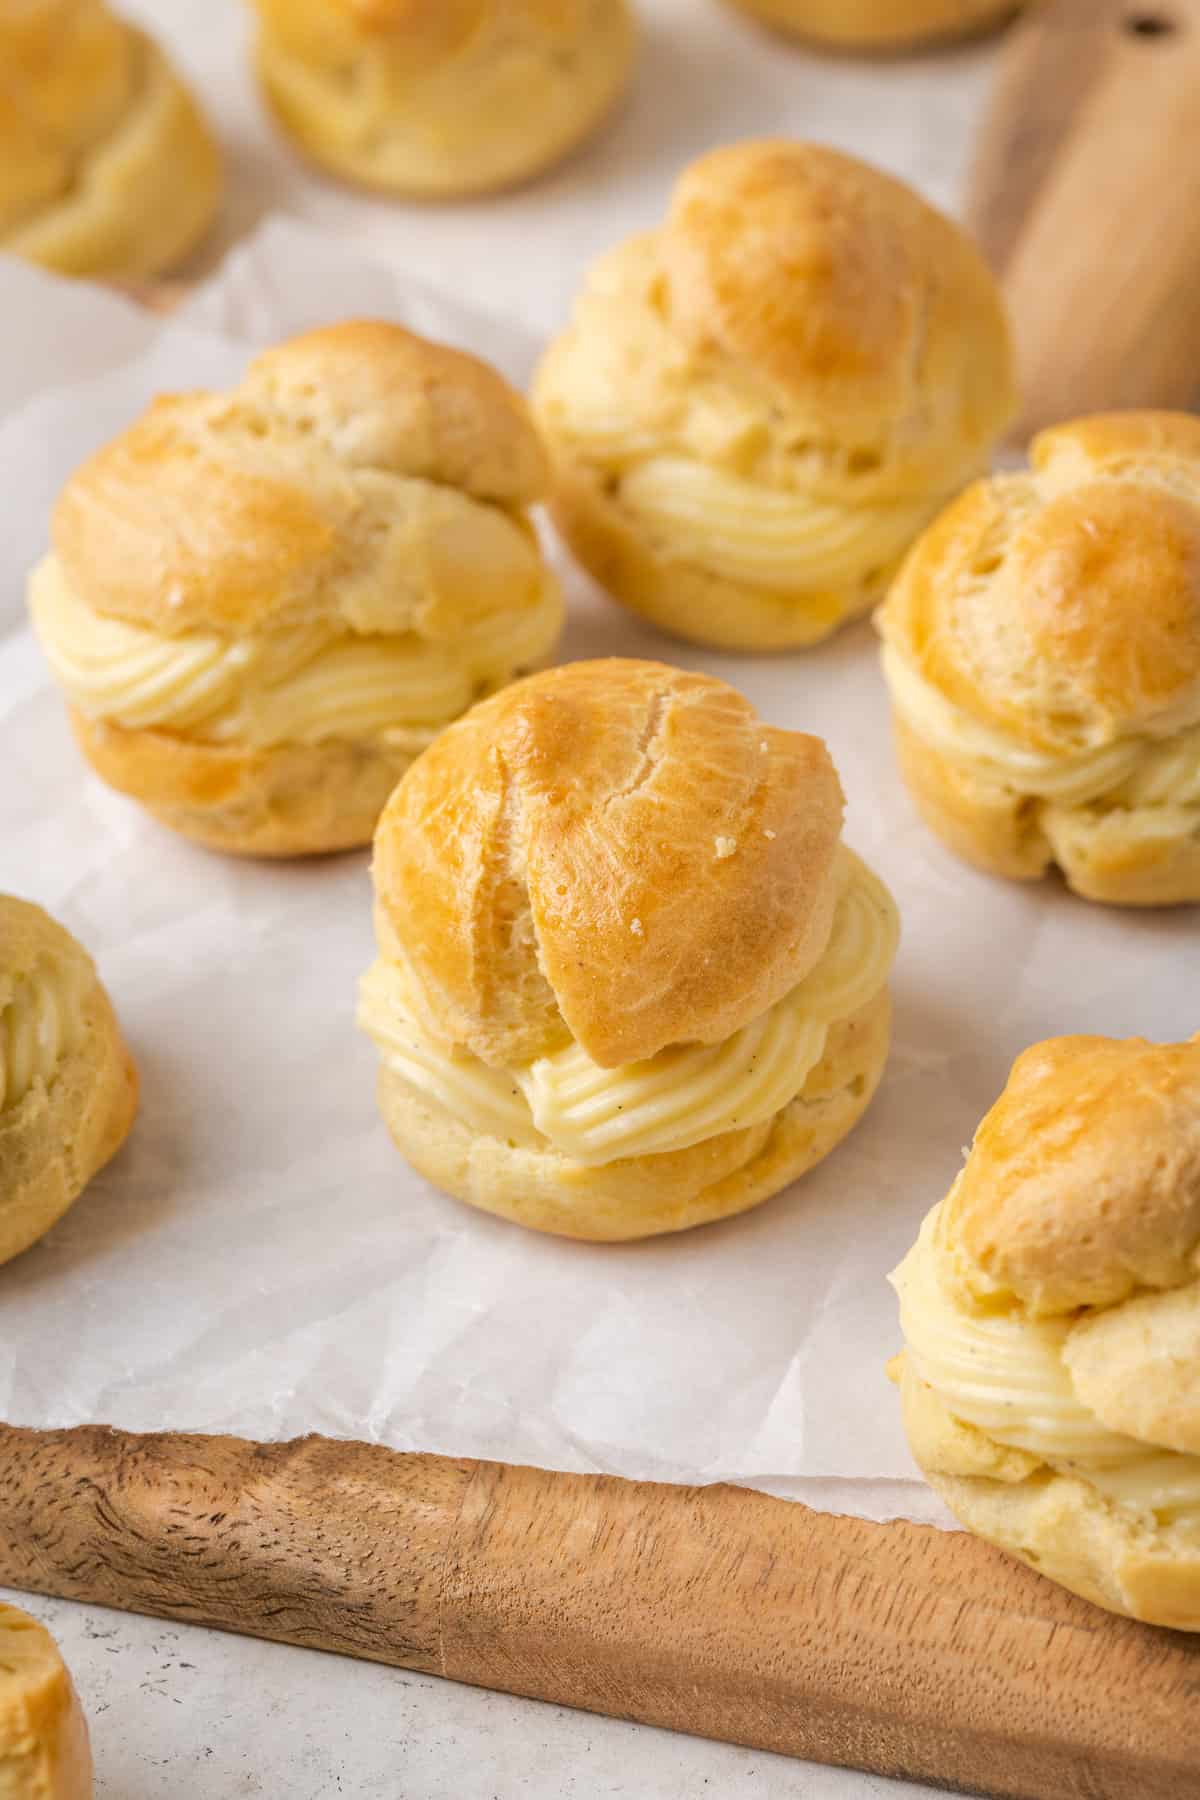 Assorted gluten-free cream puffs filled with vanilla pastry cream on a parchment-lined wooden board.